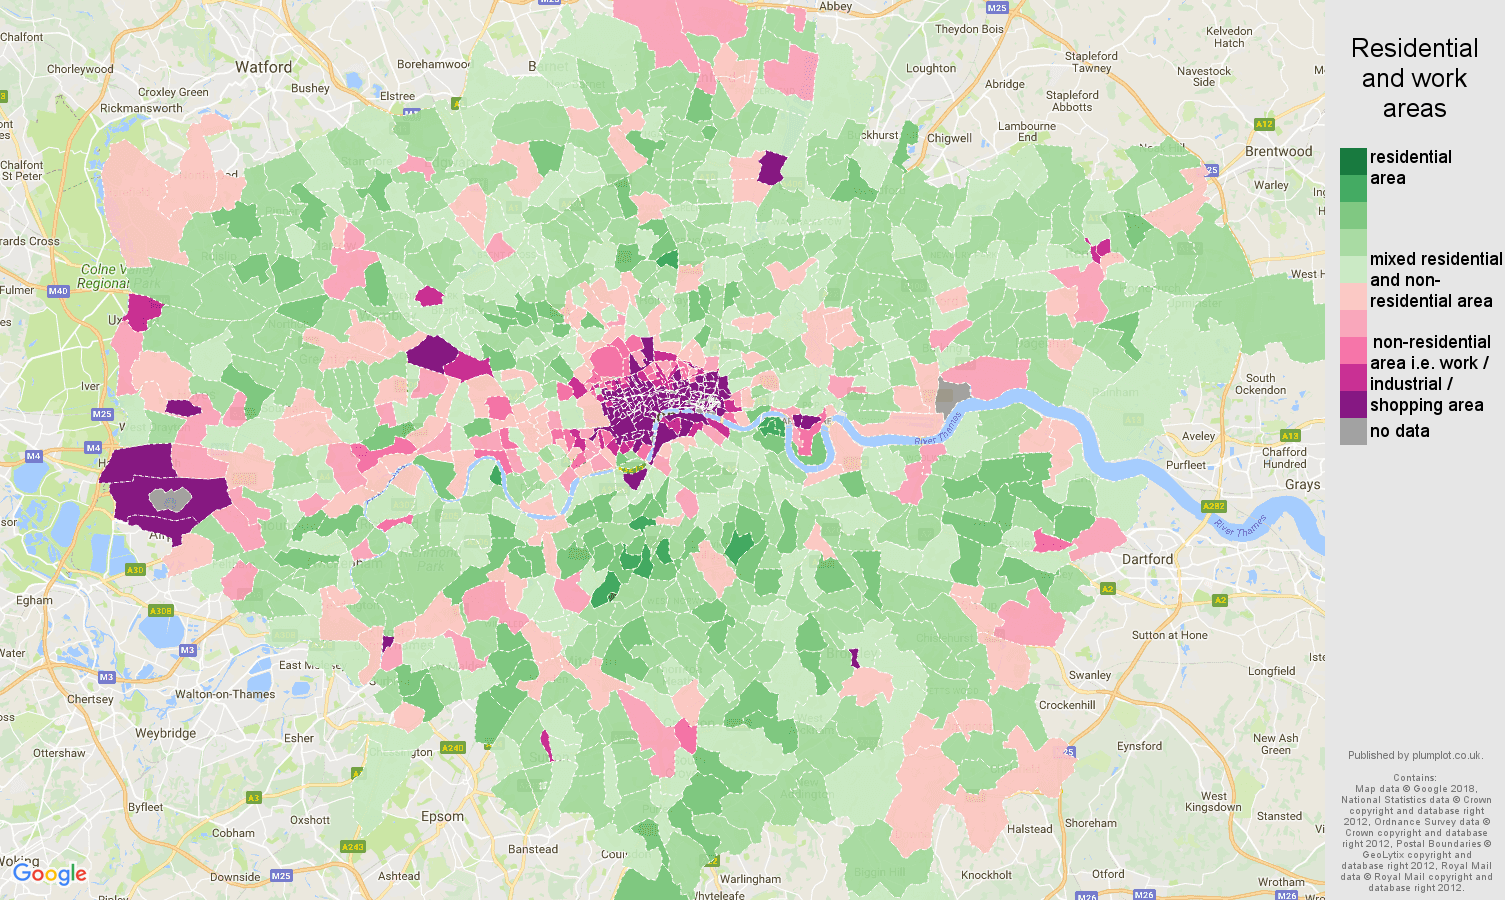 London population stats in maps and graphs.